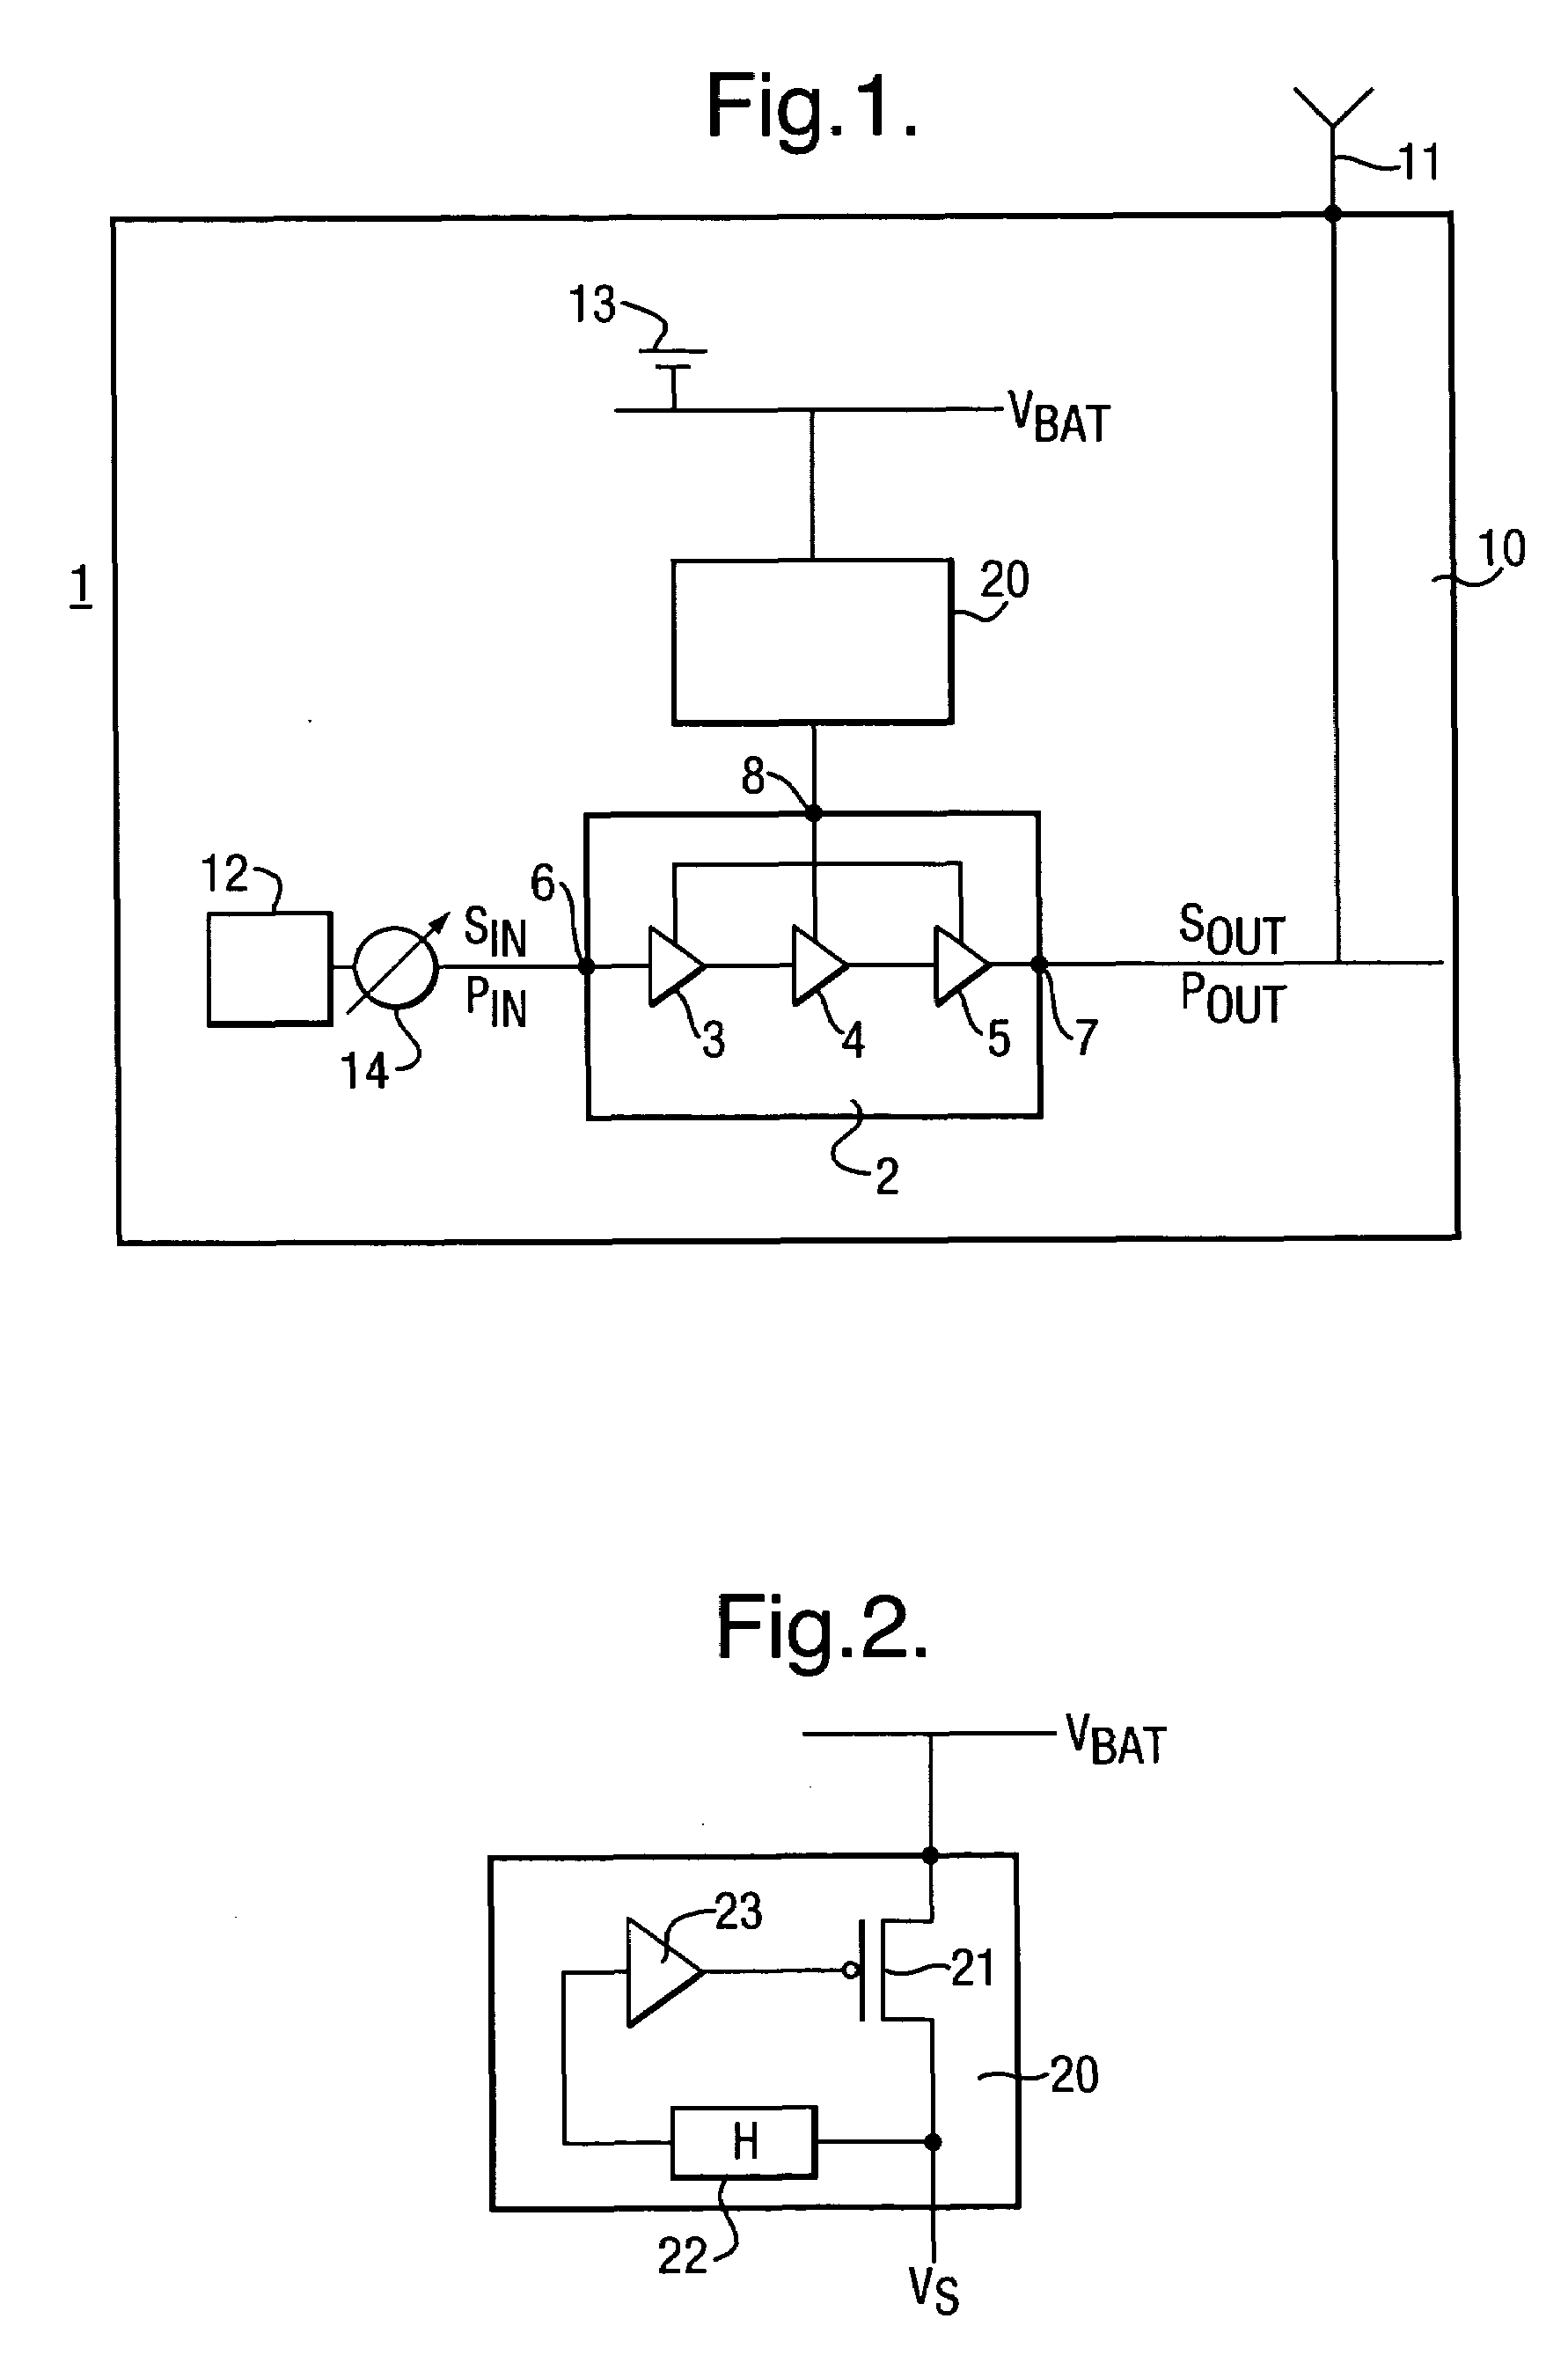 Power control of a power amplifier